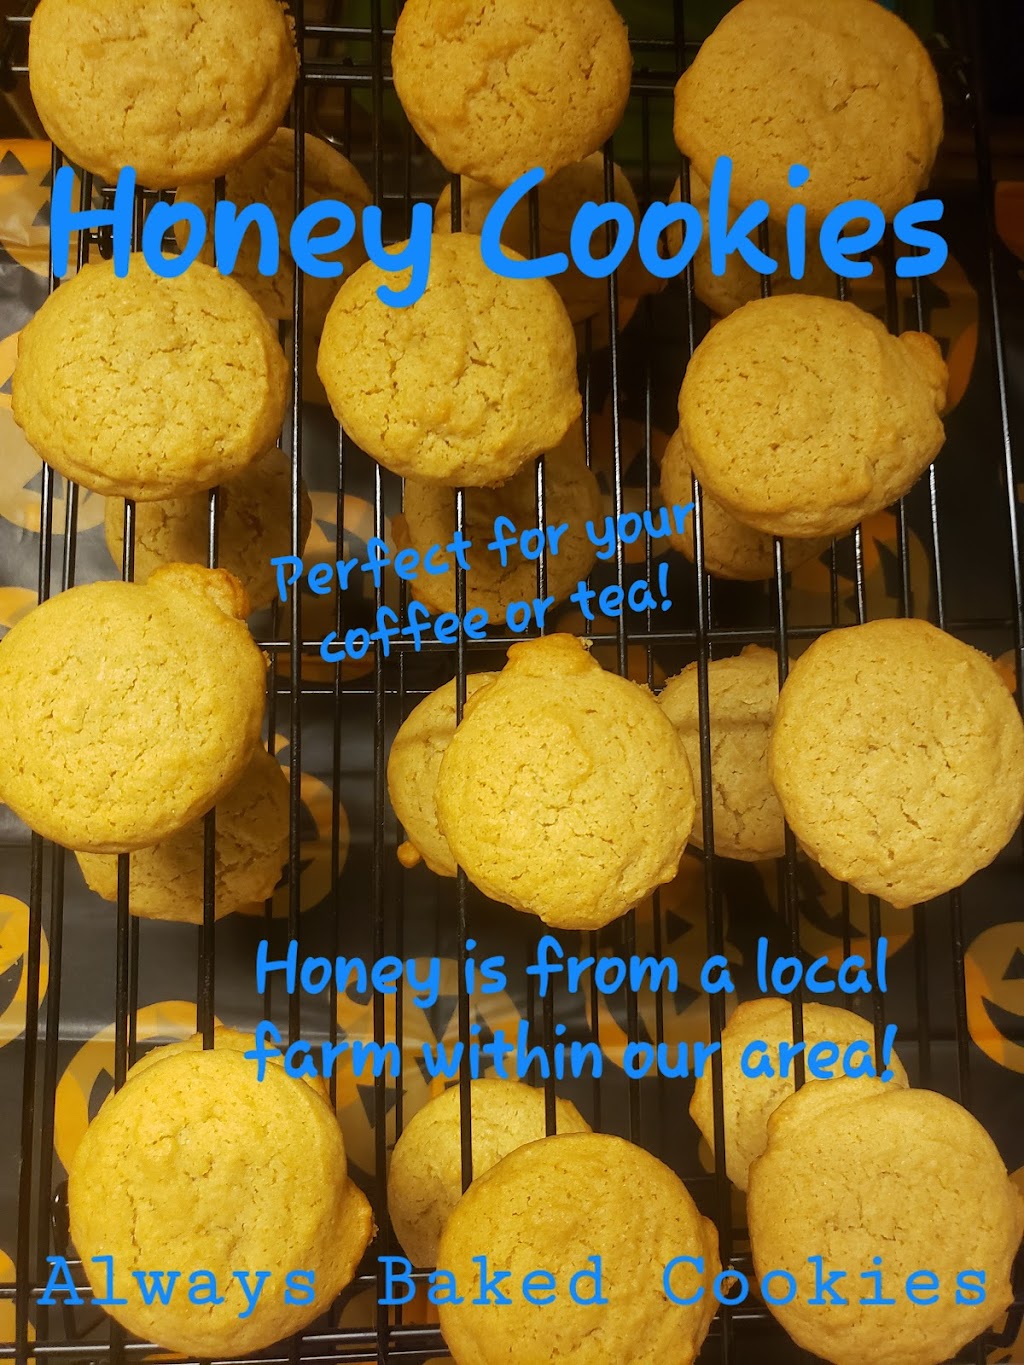 Always Baked Cookies & Desserts | 901 Center St, Dundee, FL 33838 | Phone: (863) 514-9764